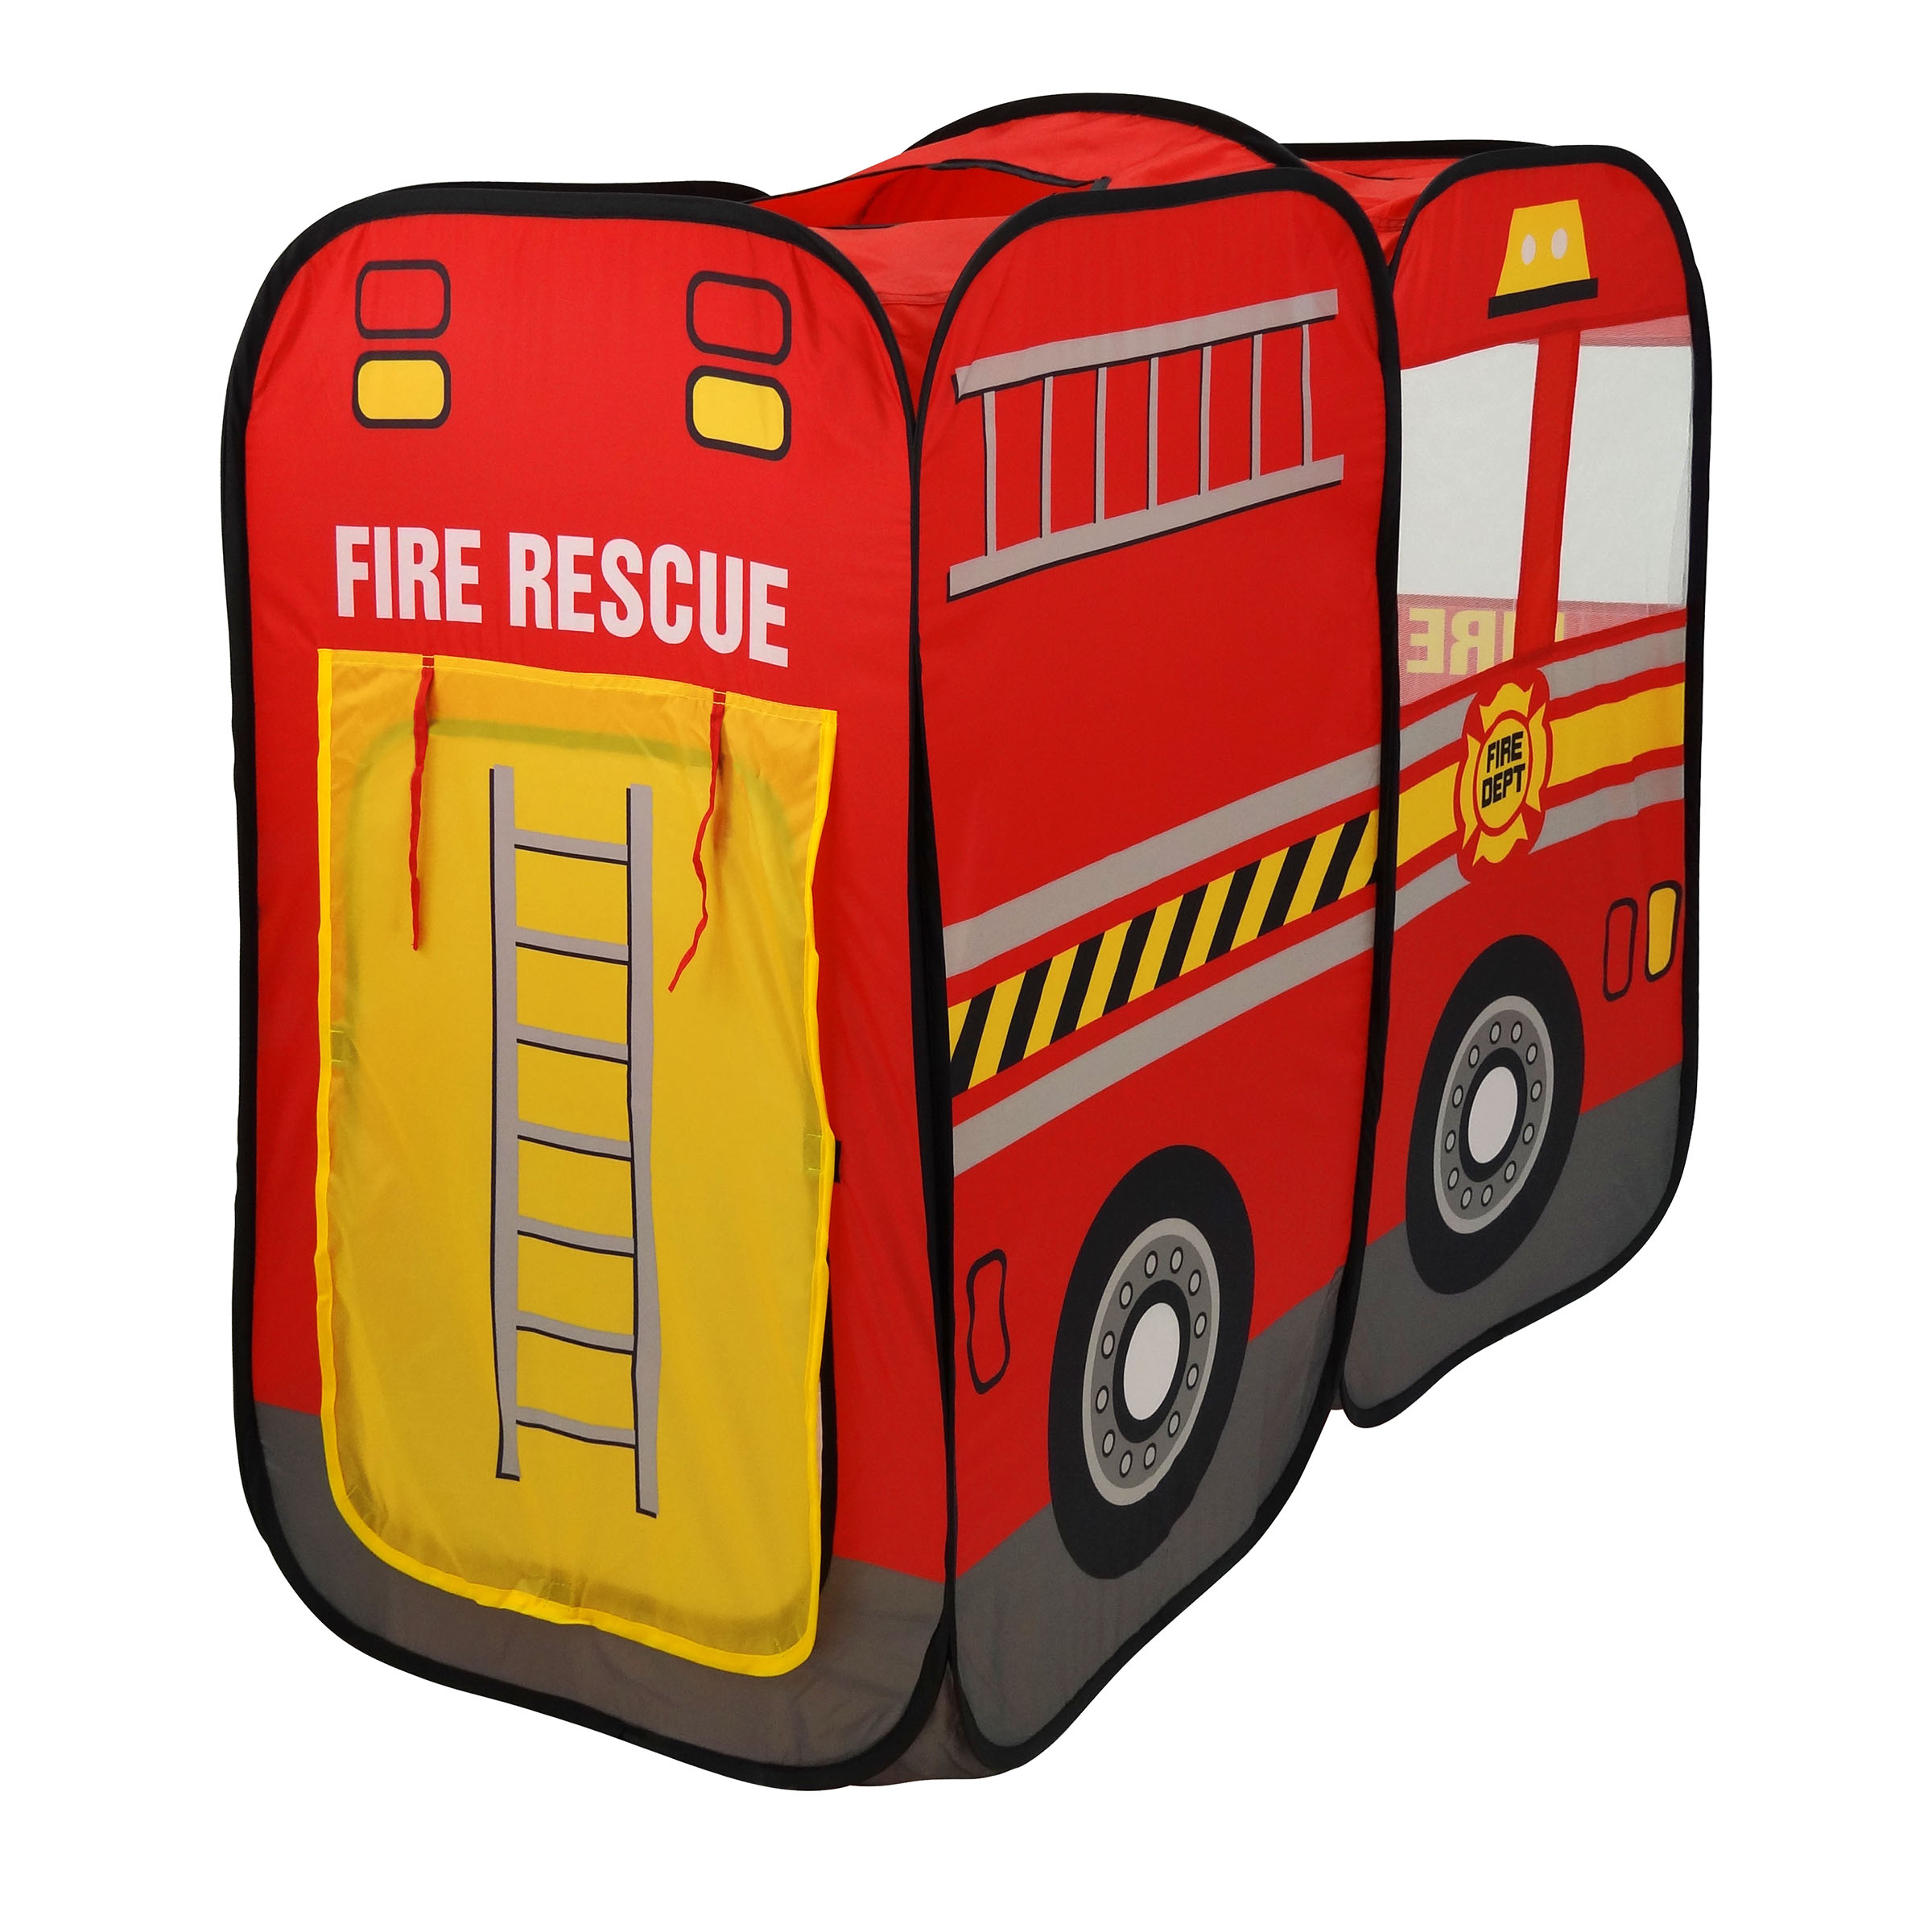 My First Fire Truck - image 4 of 7